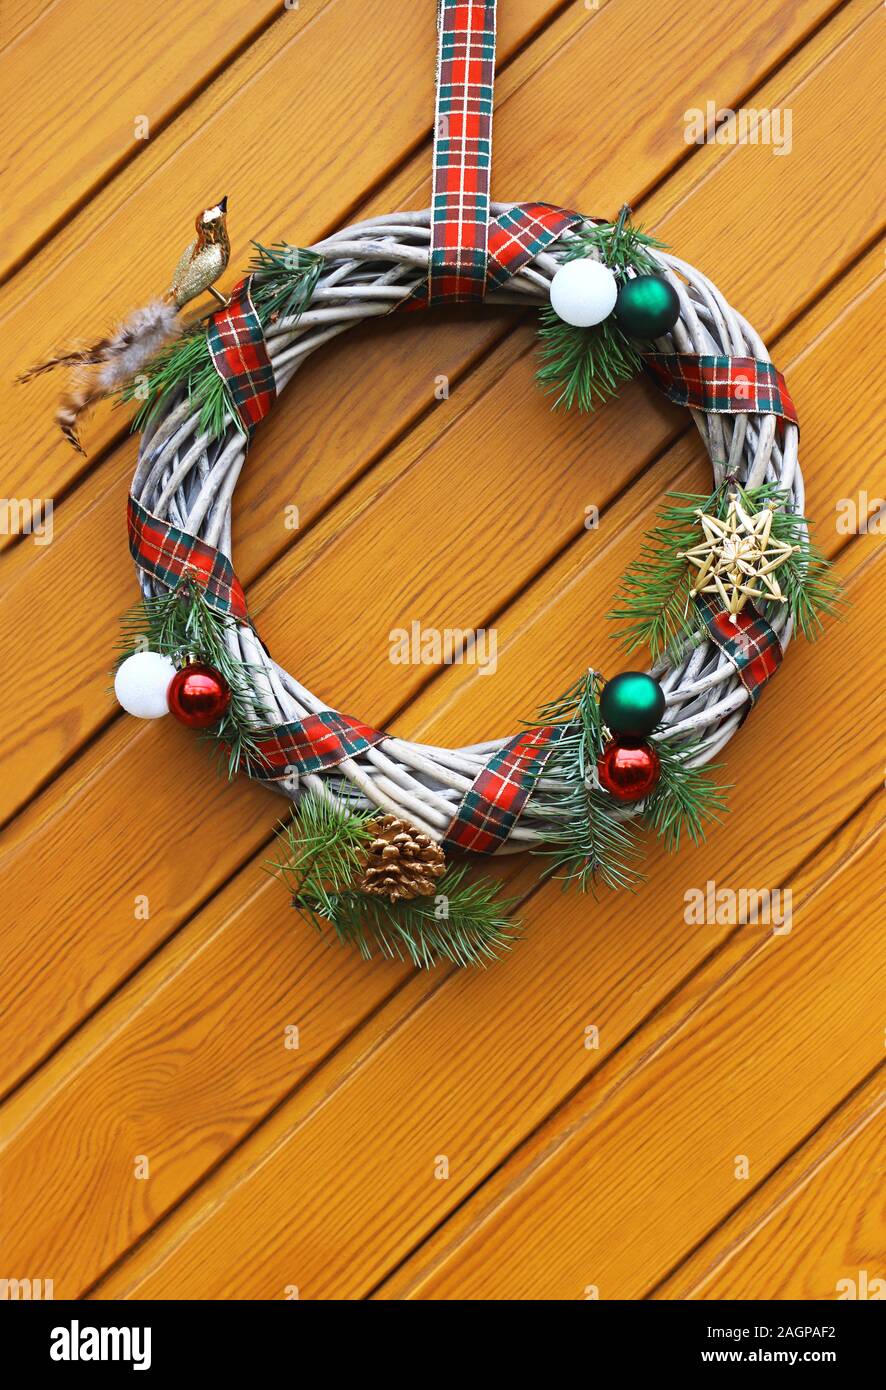 a beautiful retro Christmas wreath hanging on a wooden door Stock Photo